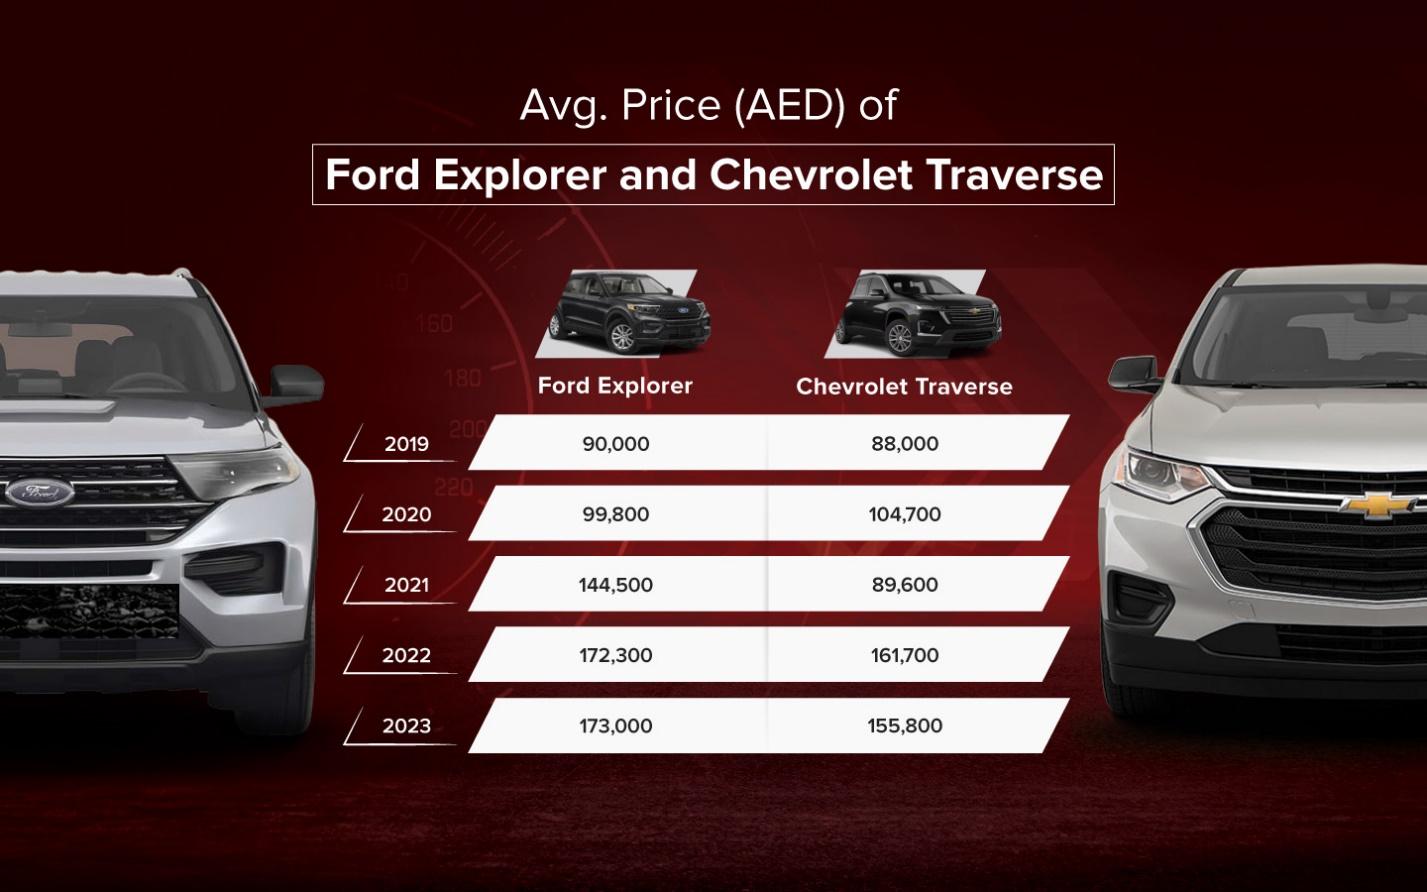 The average price of the Ford Explorer and Chevrolet Traverse in the pre-owned market
